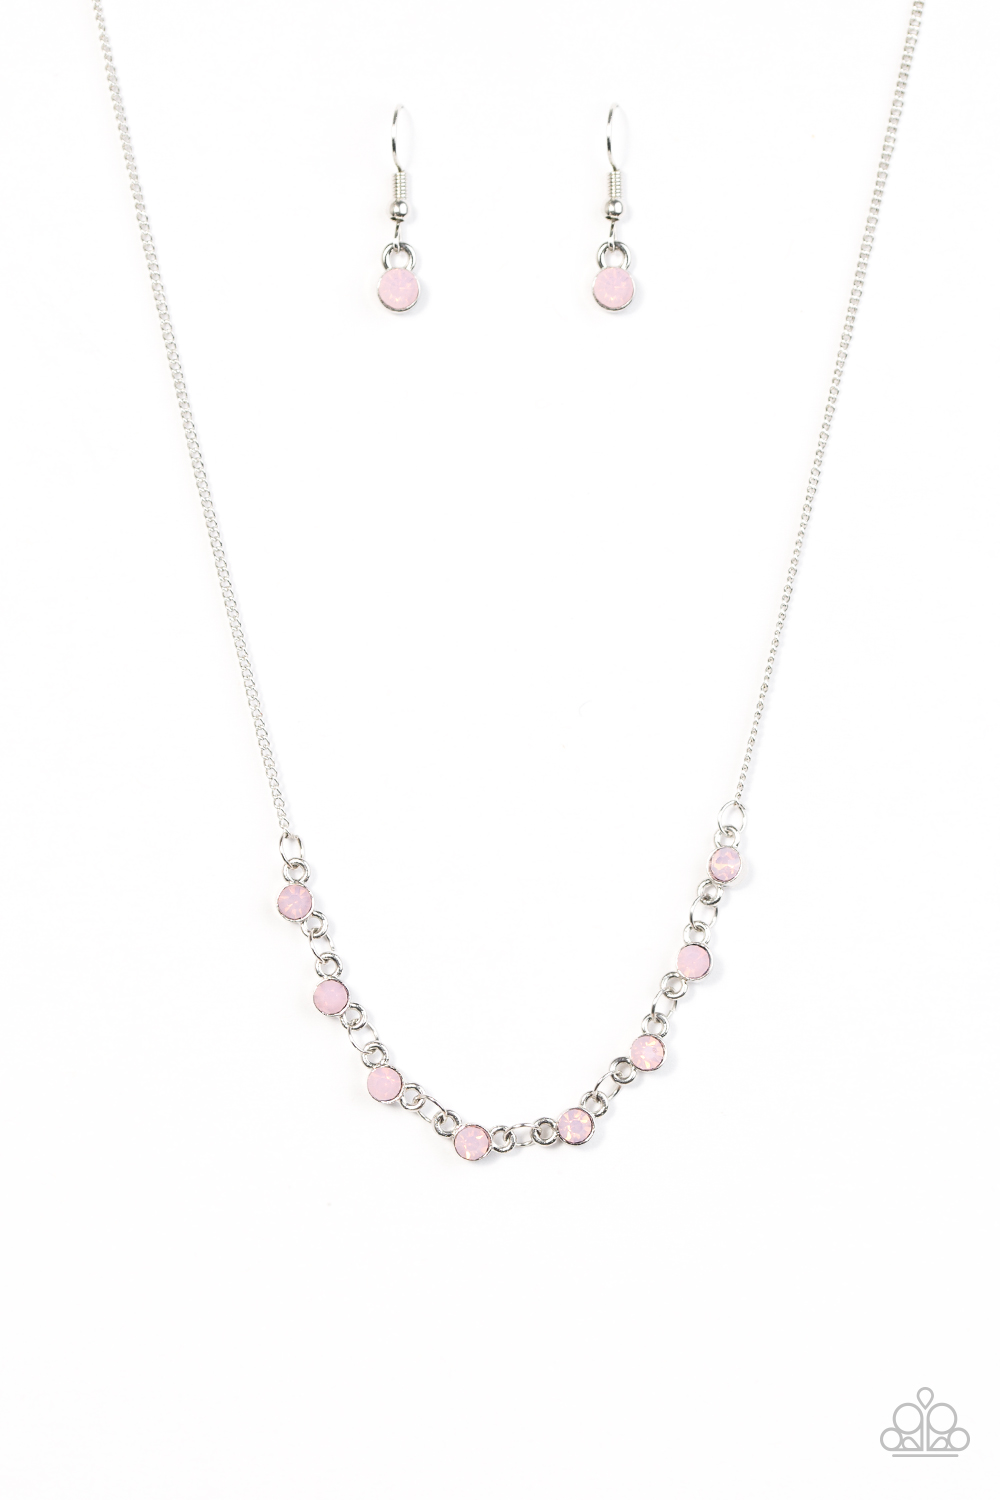 Paparazzi Accessories: Stay Sparkly - Pink | Paparazzi Accessories